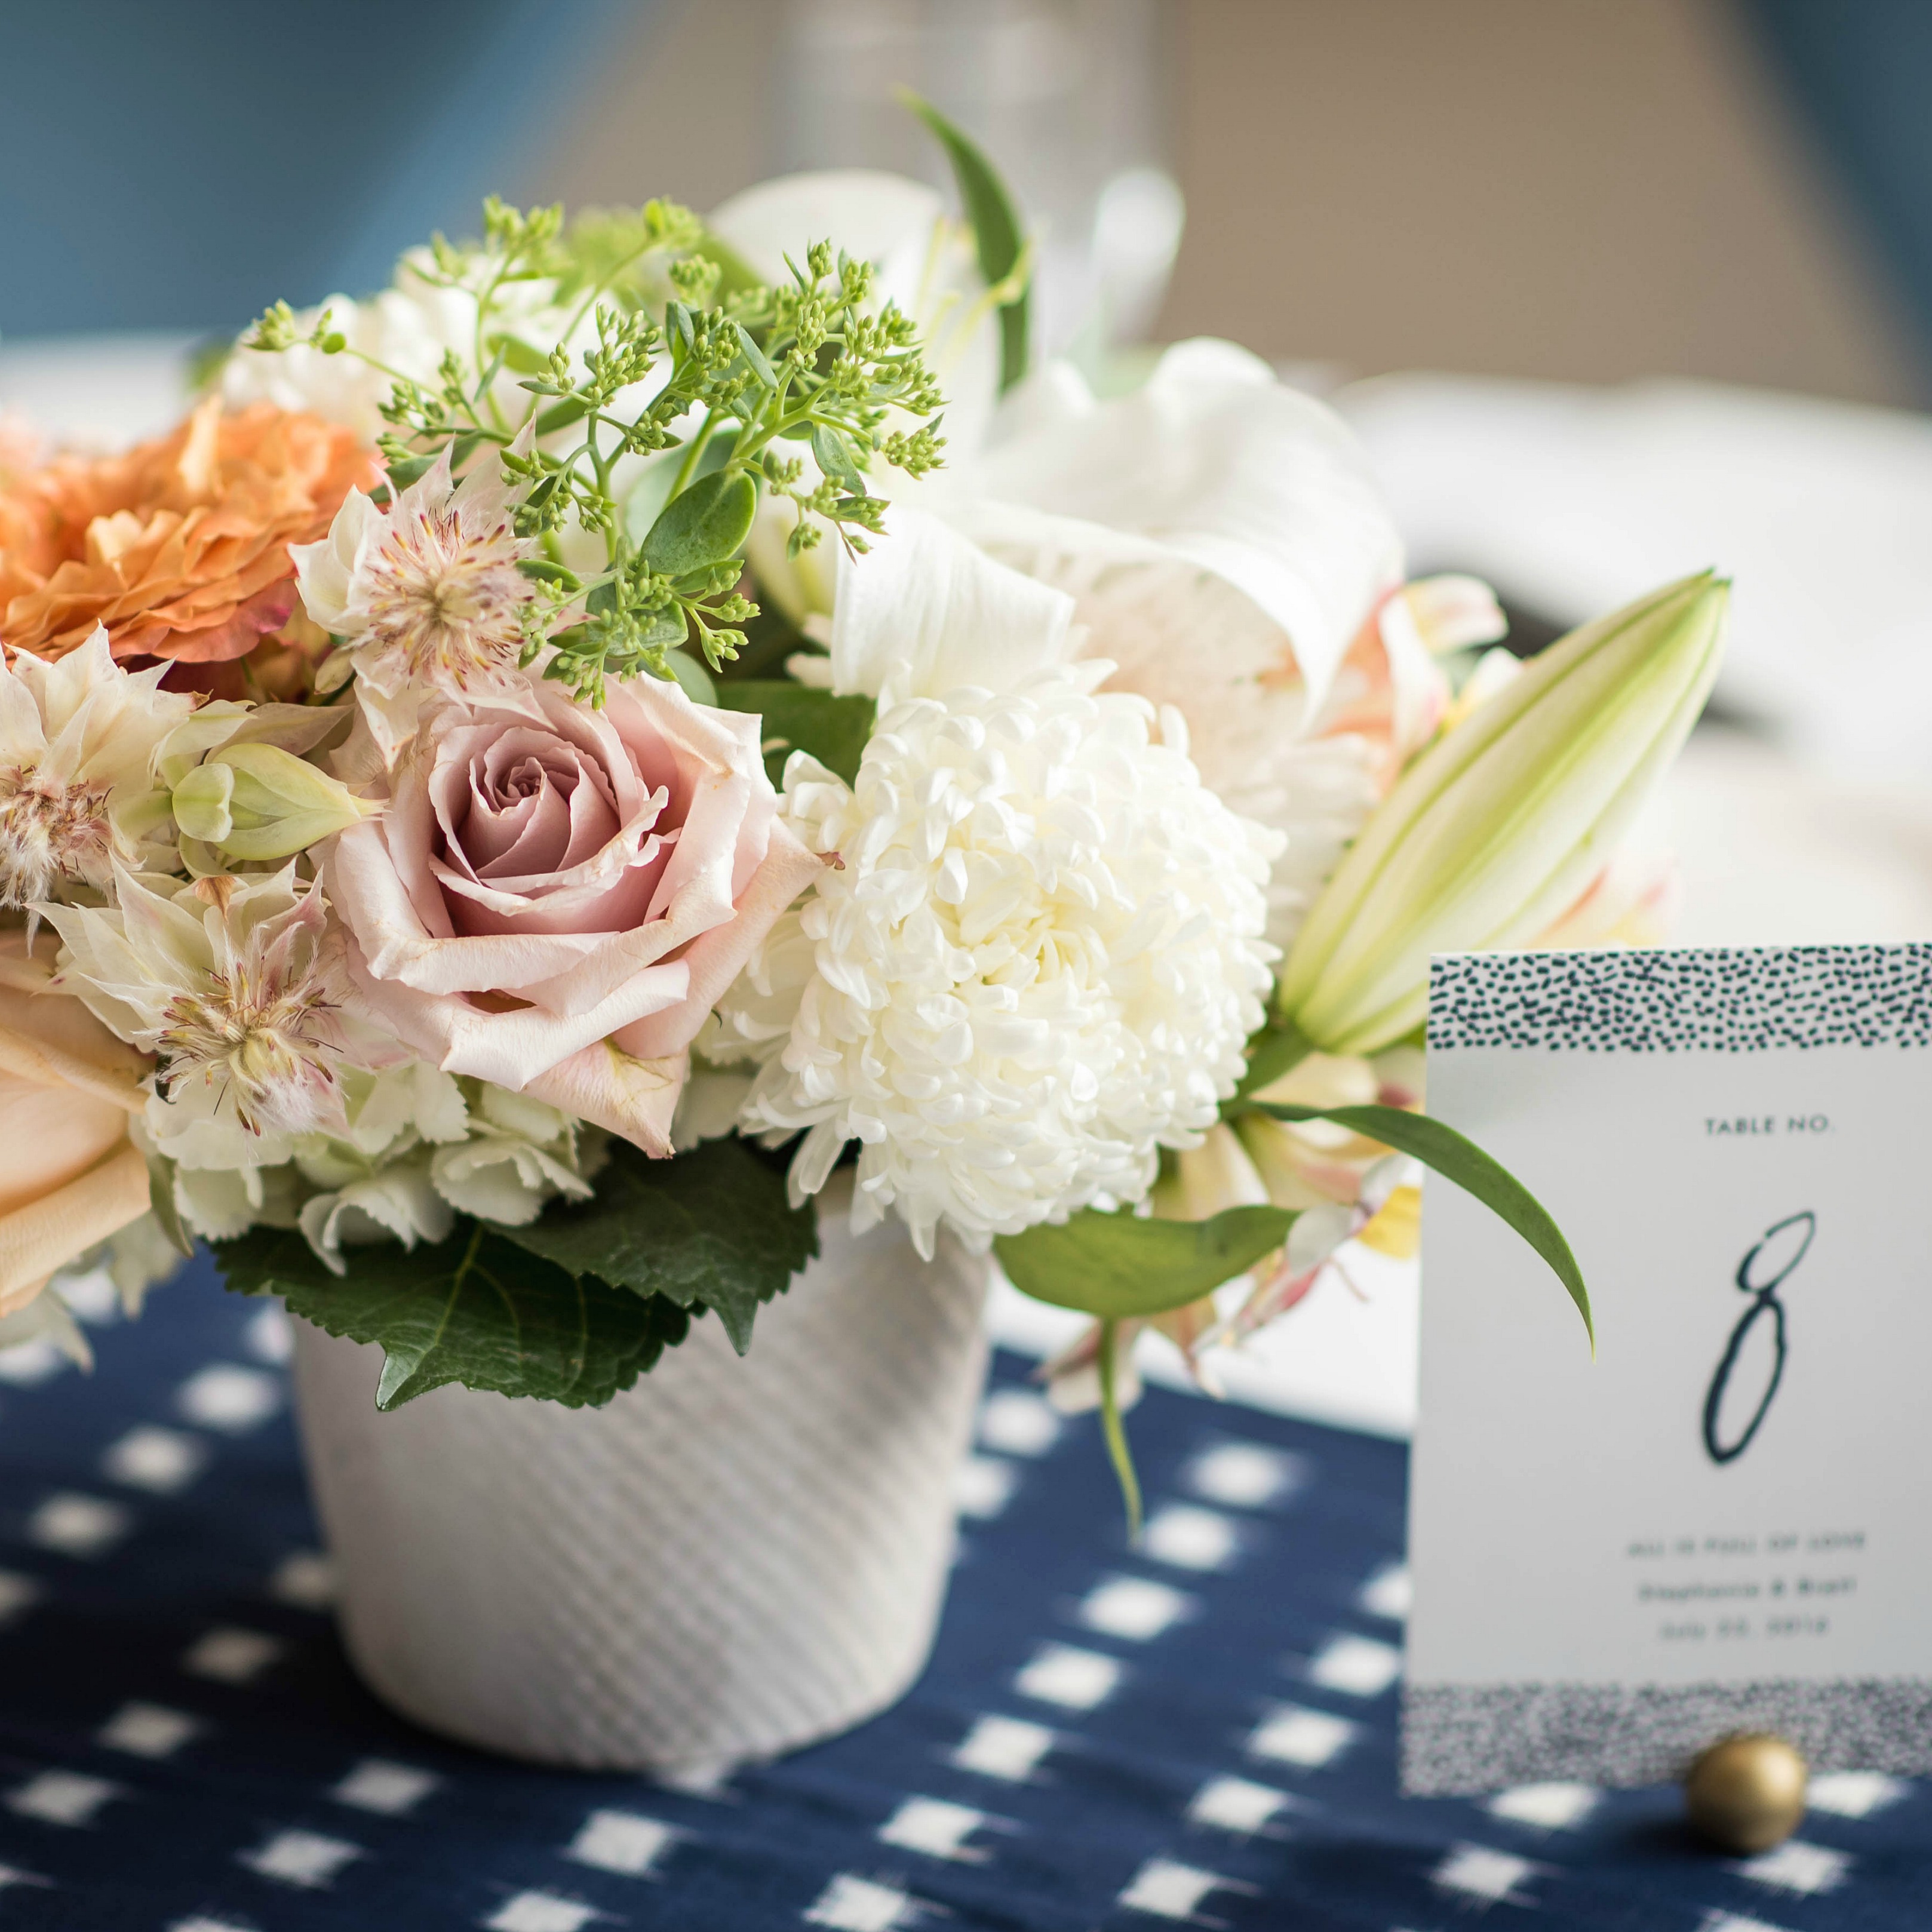 JS Weddings and Events, a Grand Rapids Wedding Planner and Floral Designer. A MidCentury Modern Wedding at the Grand Rapids Art Museum